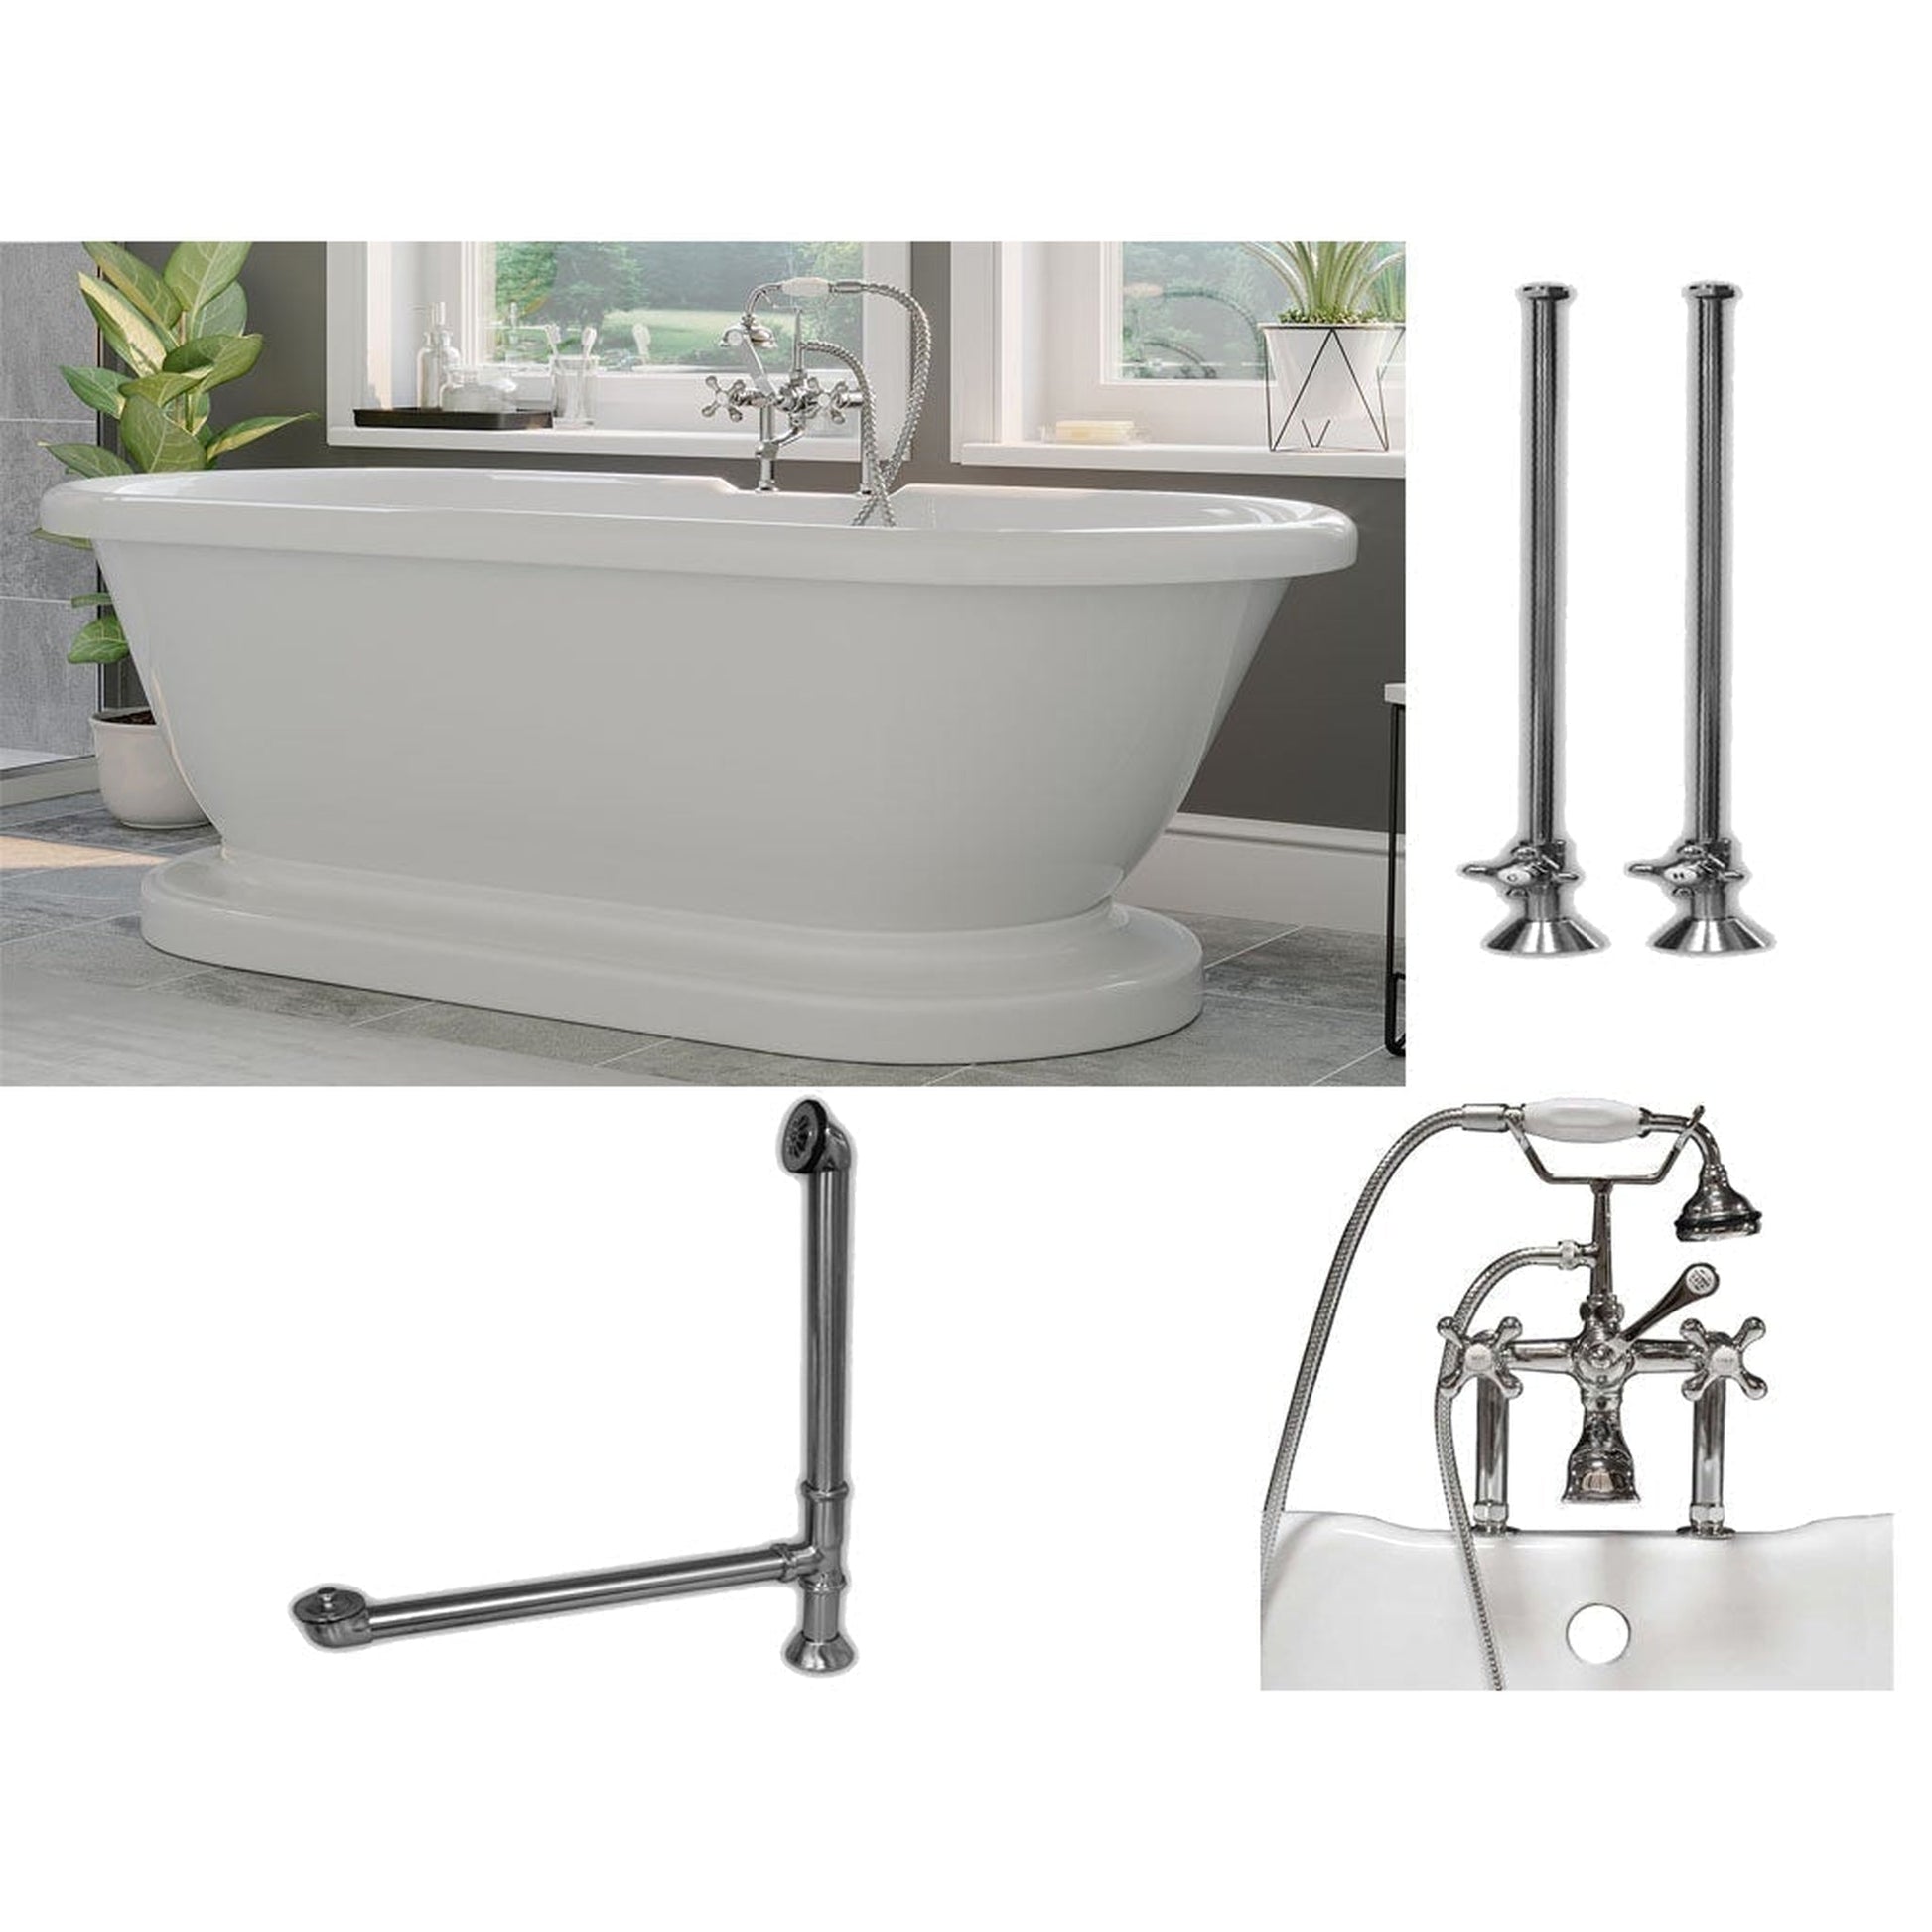 Cambridge Plumbing 70" White Acrylic Double Ended Pedestal Bathtub With Deck Holes And Complete Plumbing Package Including 6” Riser Deck Mount Faucet, Supply Lines, Drain And Overflow Assembly In Polished chrome